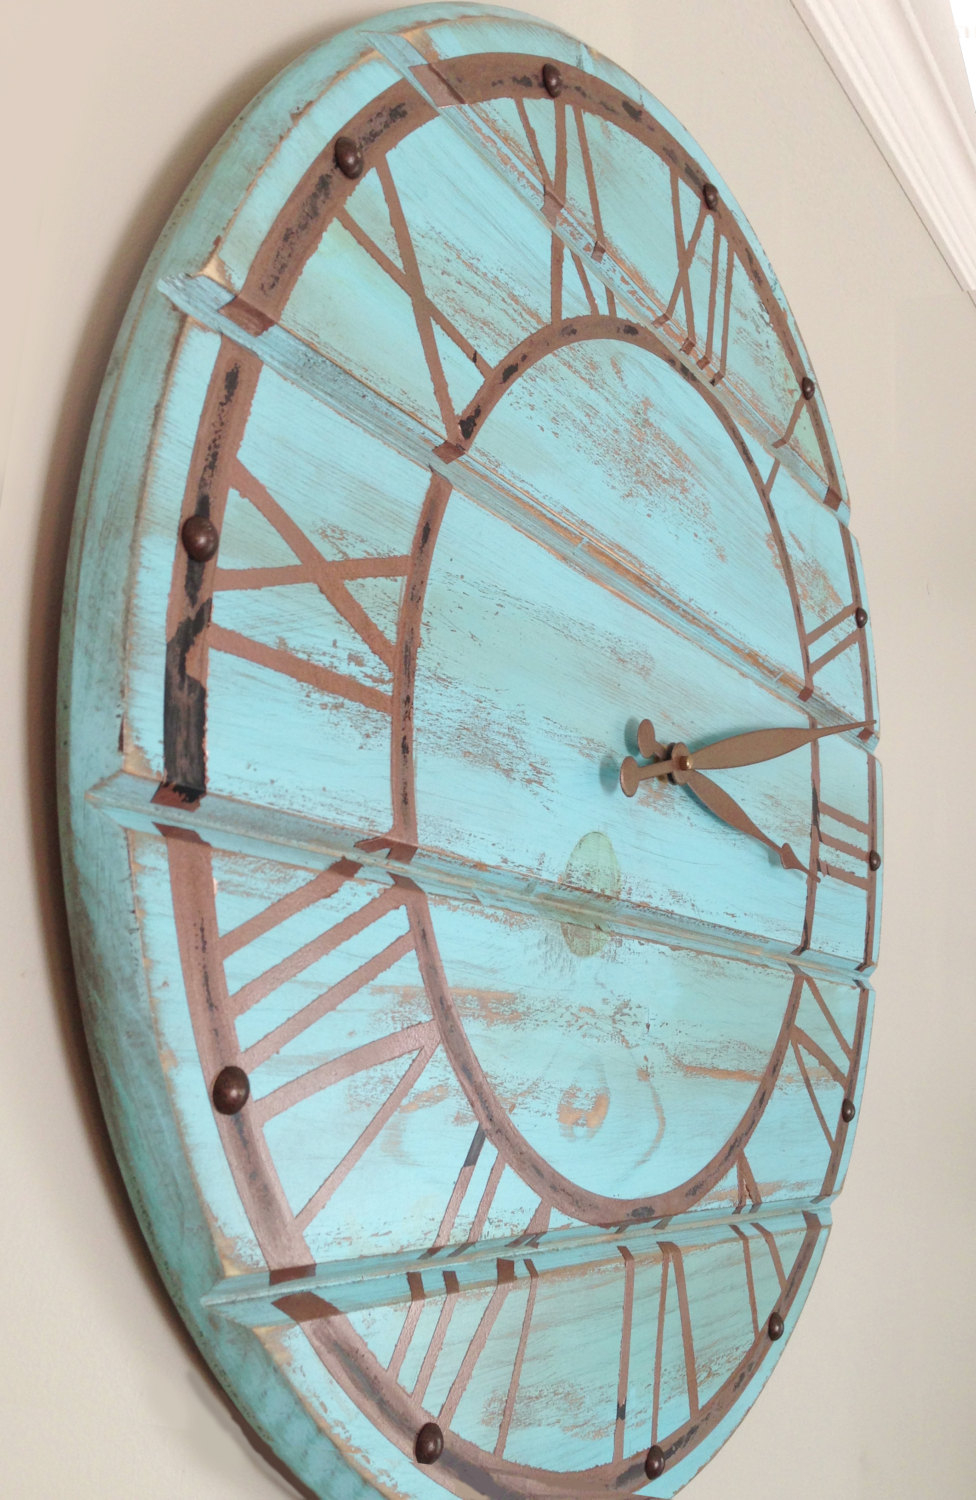 Shabby chic blue wooden wall clock with